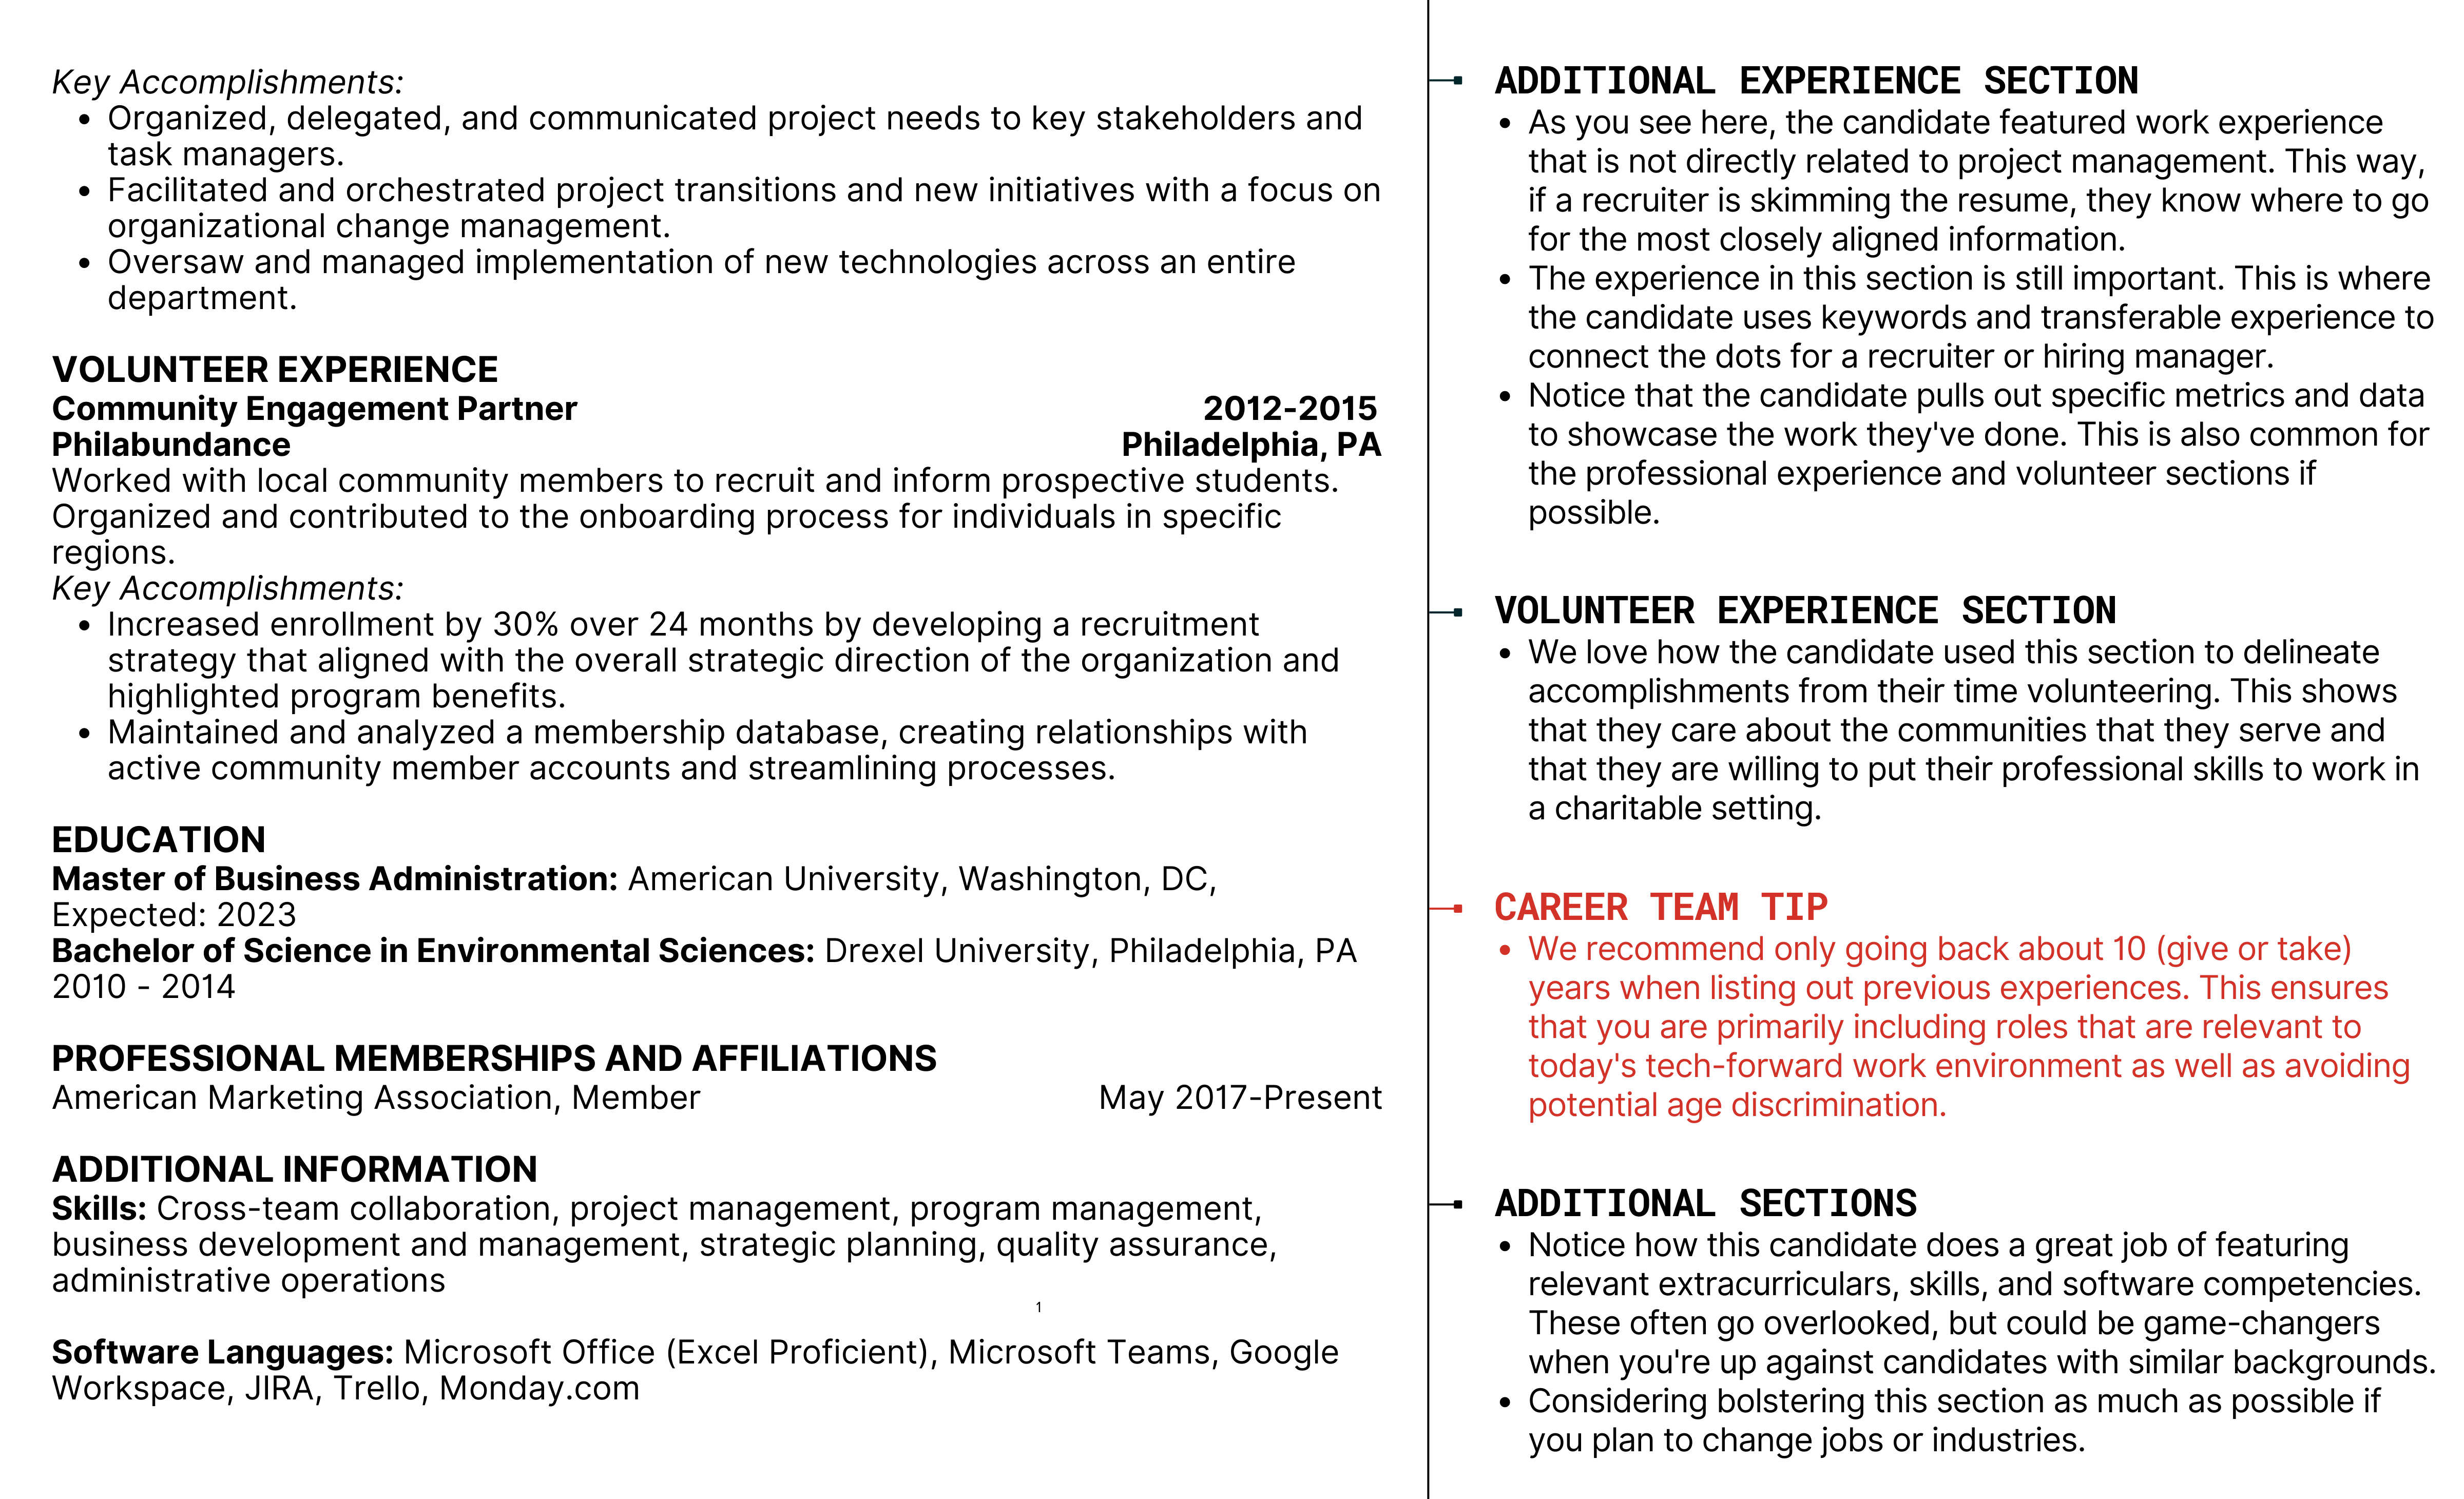 Page two of a sample resume diagram with tips on what the candidate did successfully.